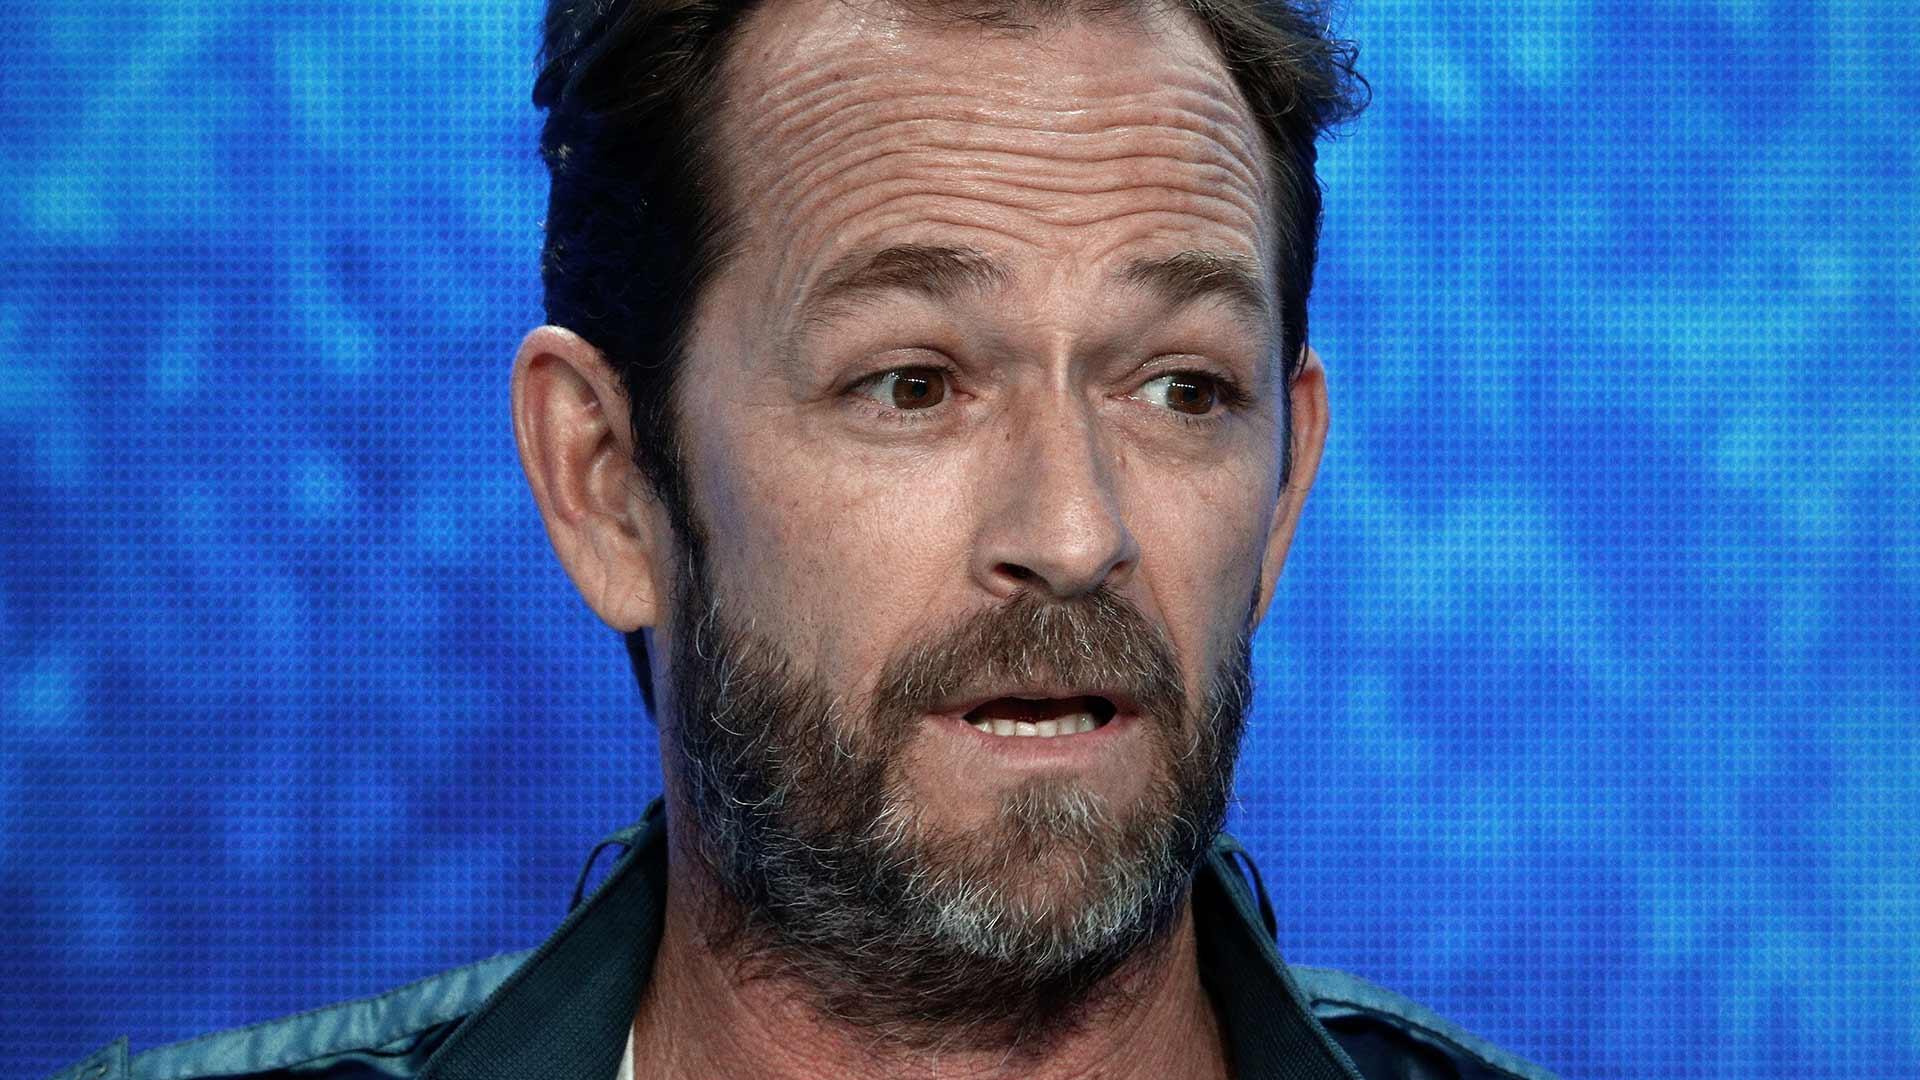 Luke Perry Is Not Buried Where His Death Certificate Says He Is, Family Keeping Final Resting Place a Secret